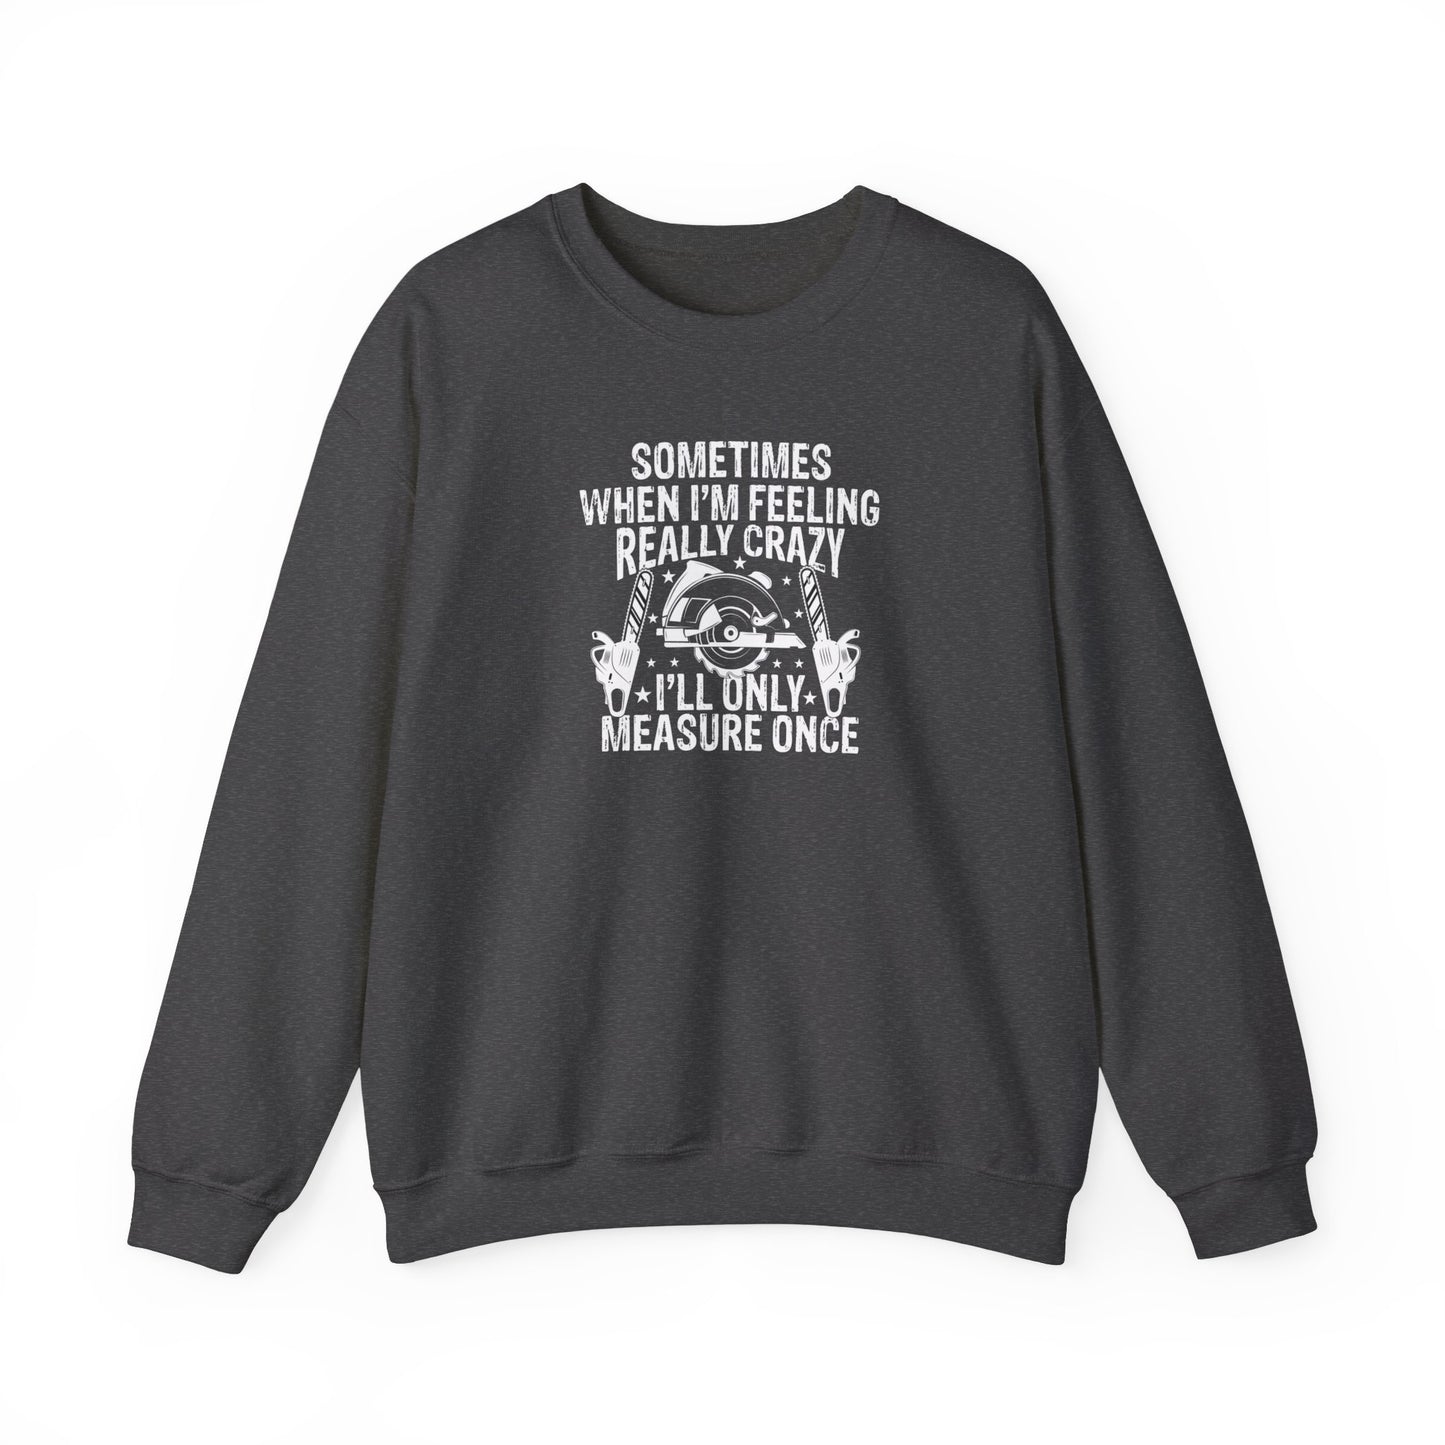 Sometimes When I'm Feeling Really Crazy I'll Only Measure Once, Woodworking Lovers - Crewneck Sweatshirt Unisex S-5XL